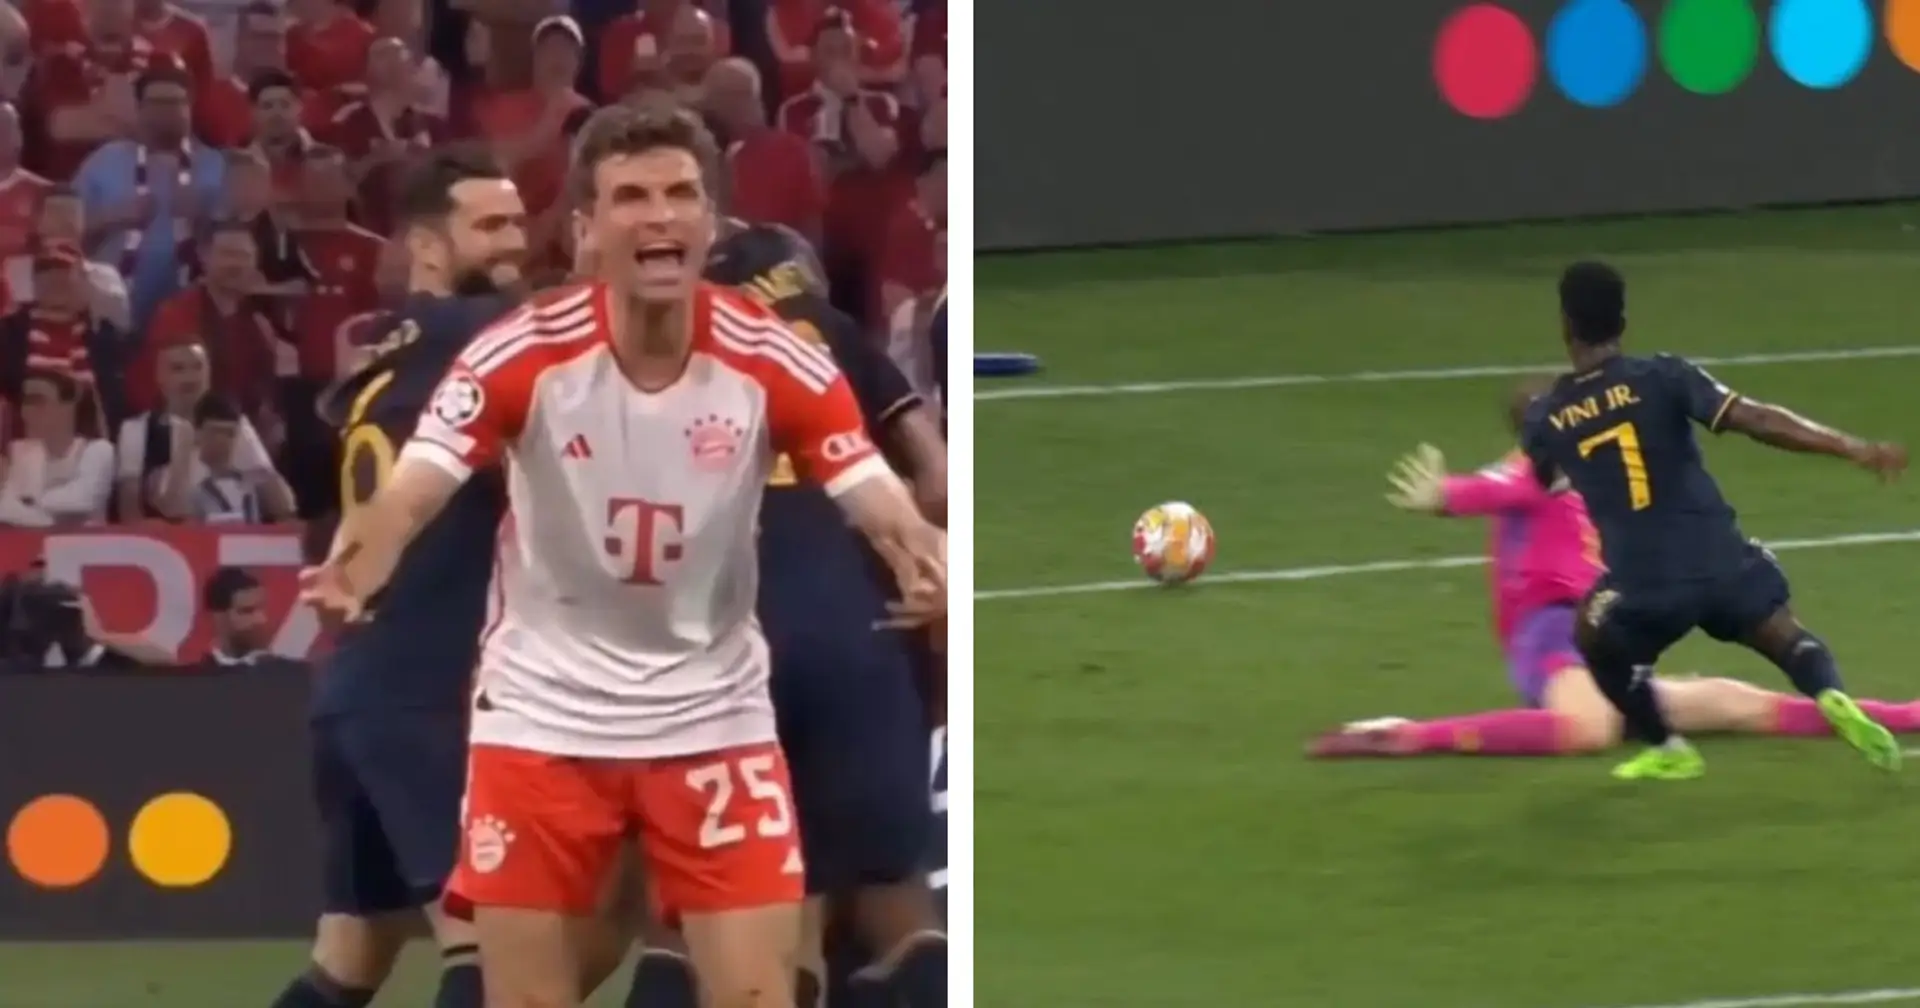 'What the f**k': Muller's hilarious reaction to Vinicius goal - spotted 